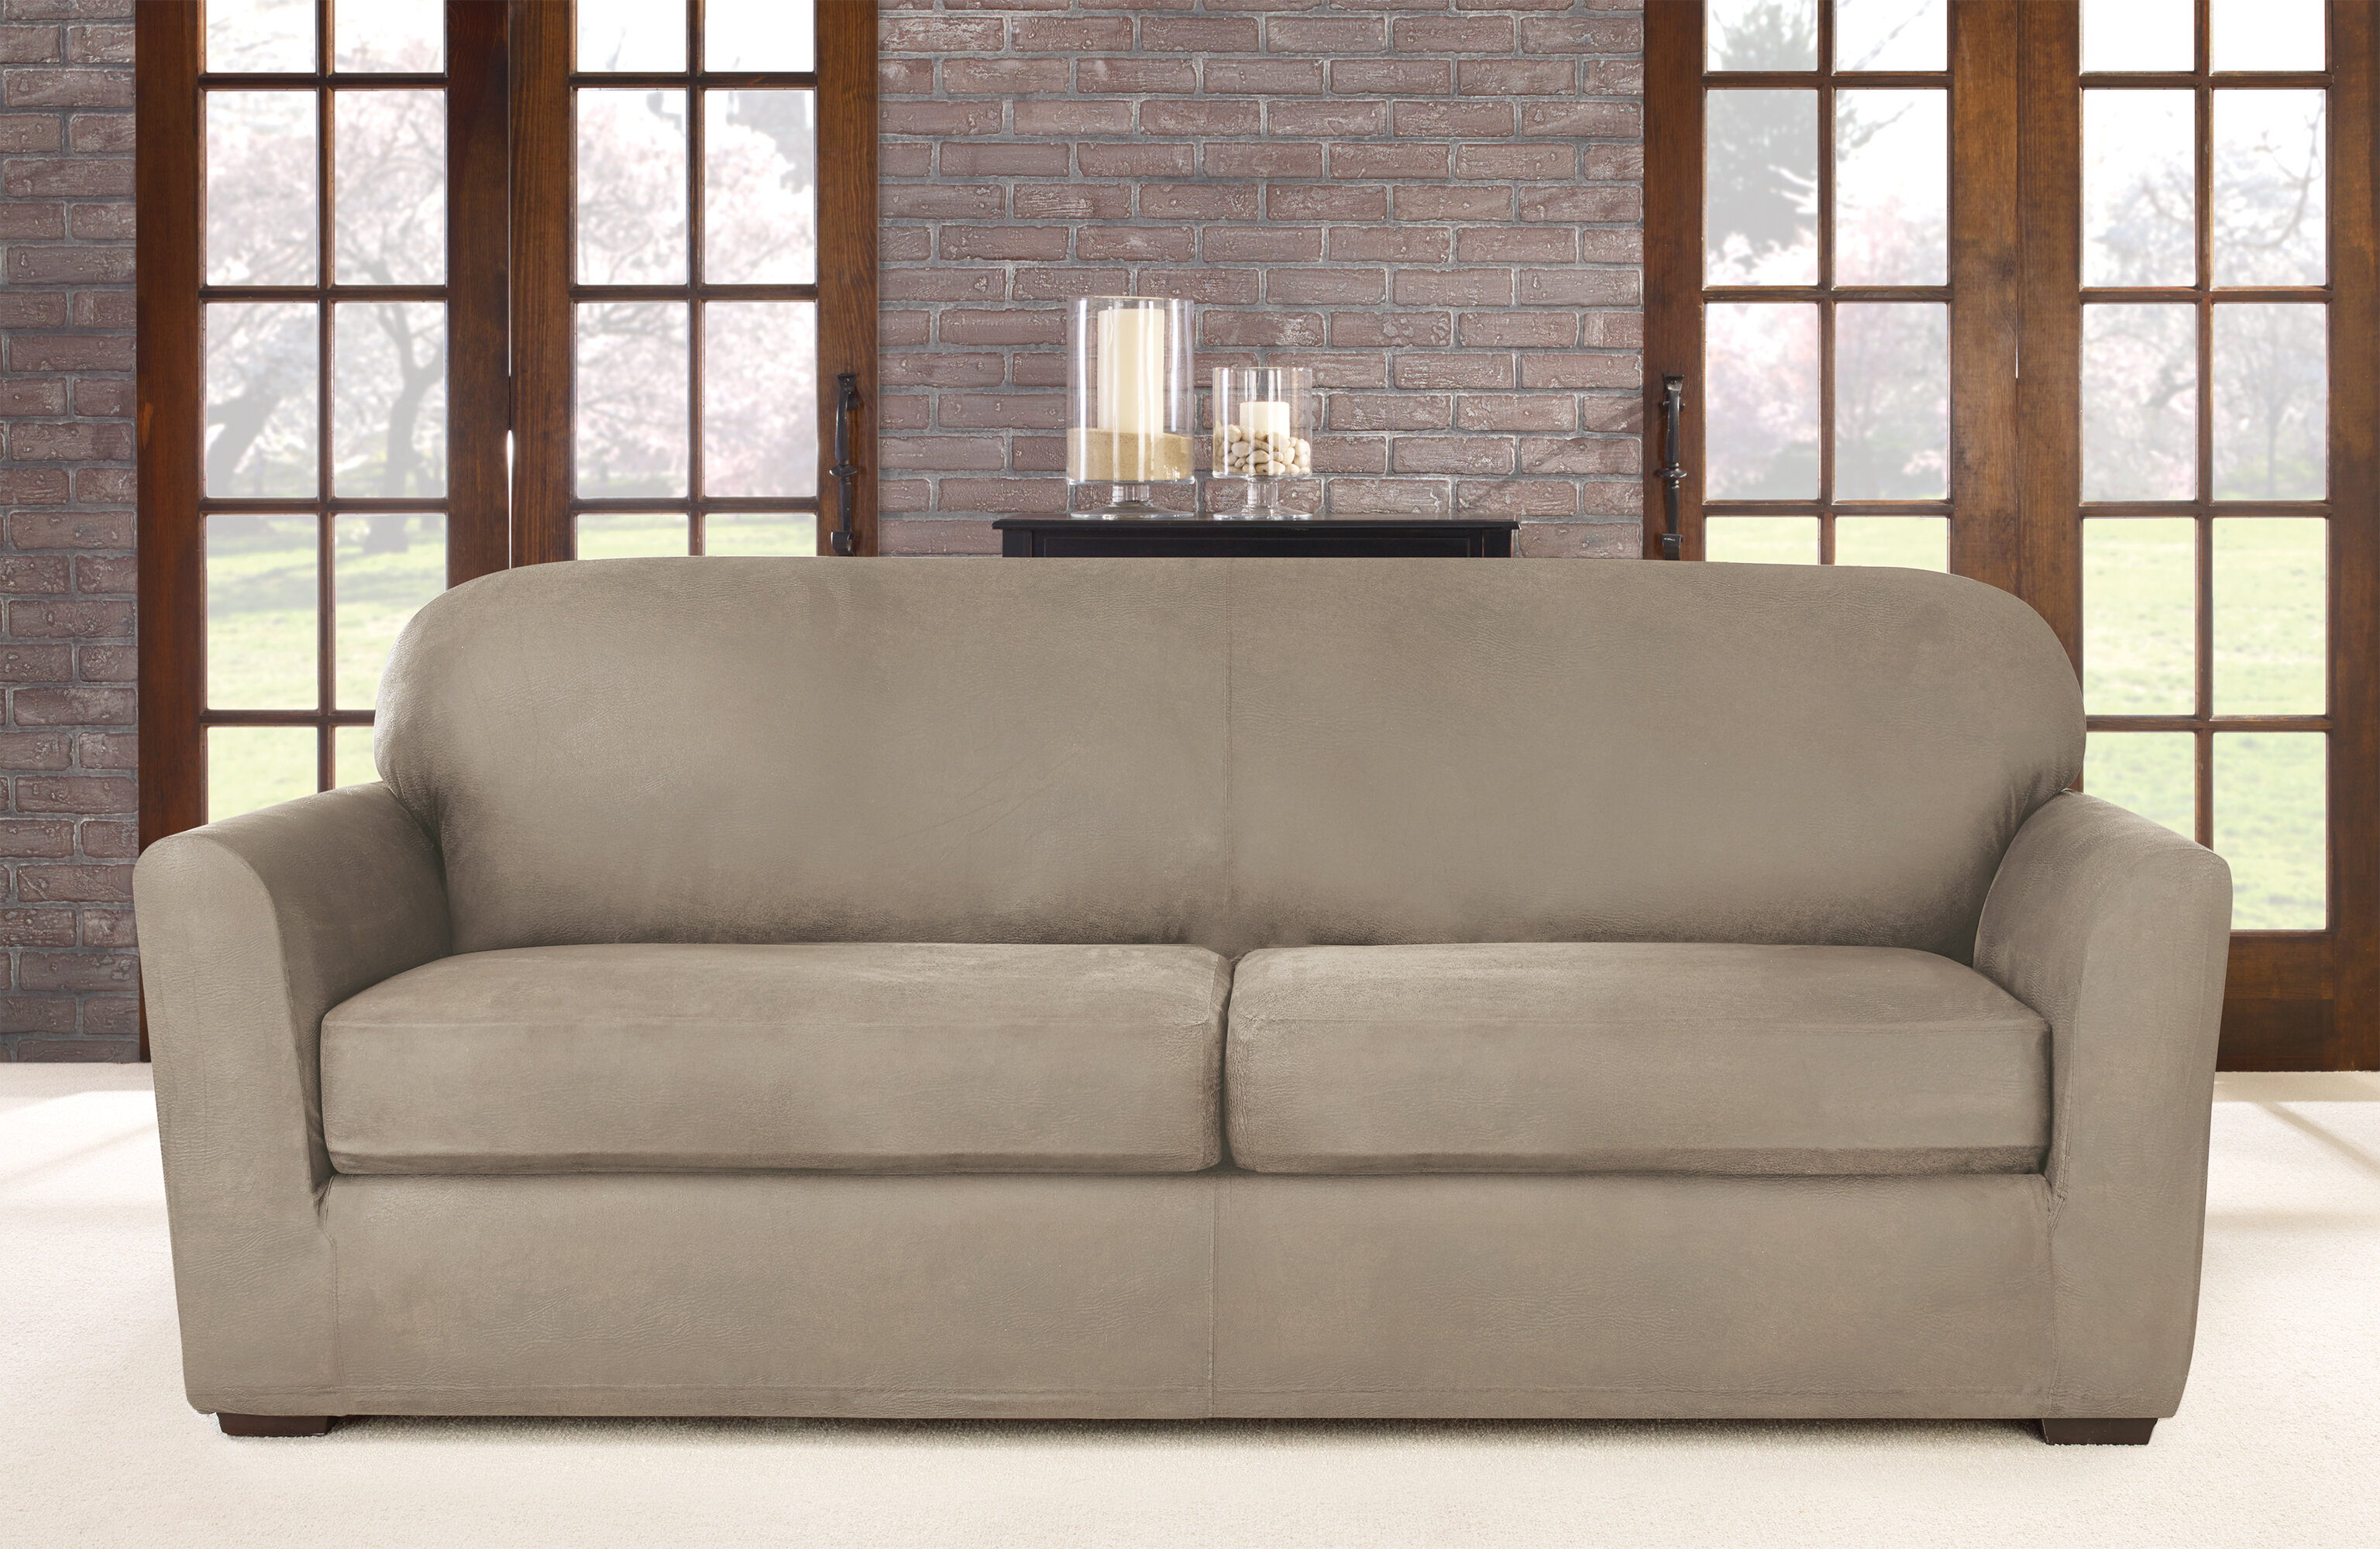 3 cushion couch slipcover